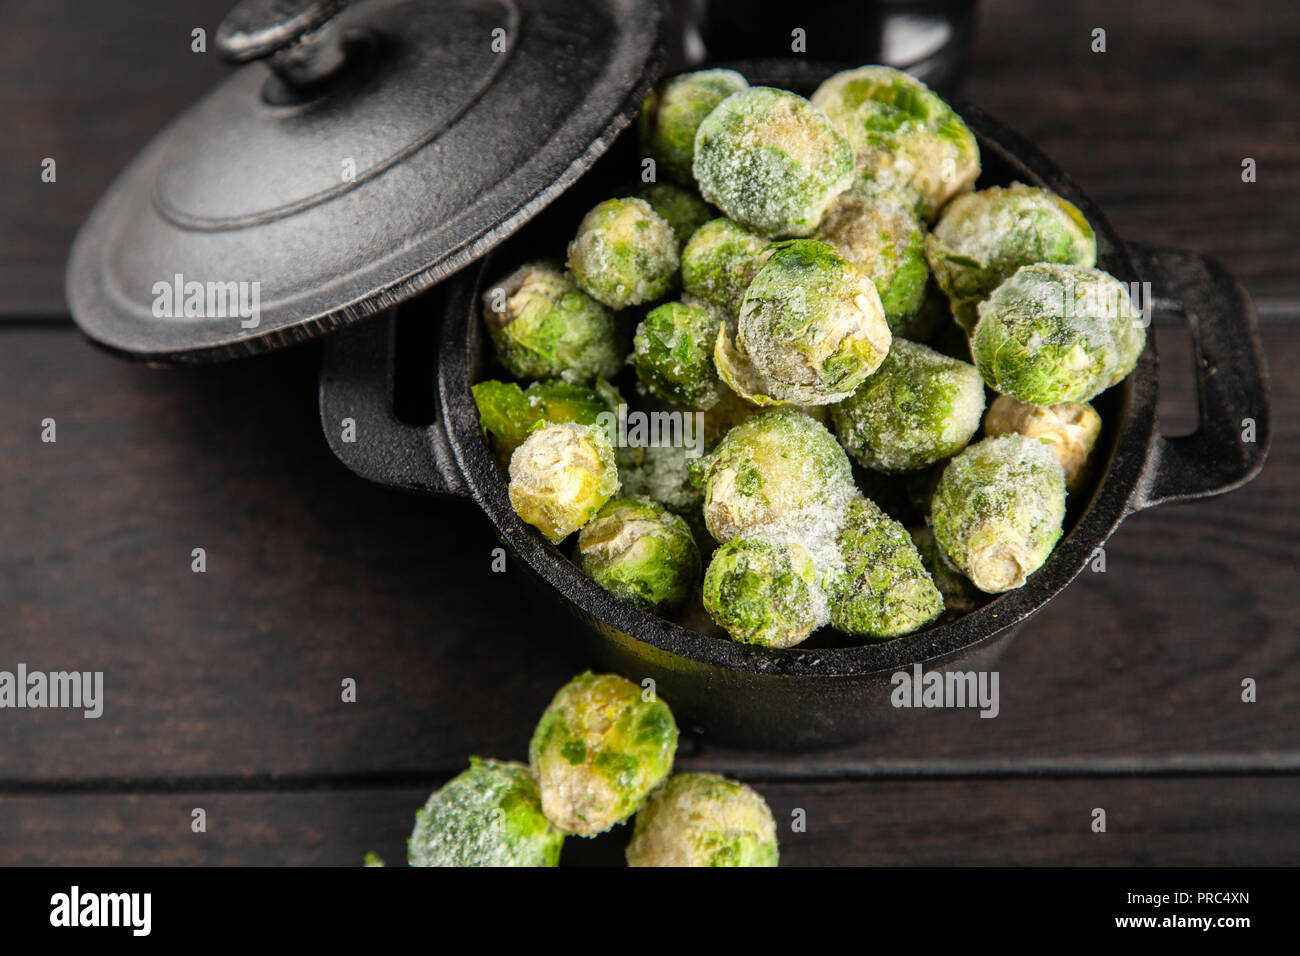 Frozen brussles sprouts Stock Photo